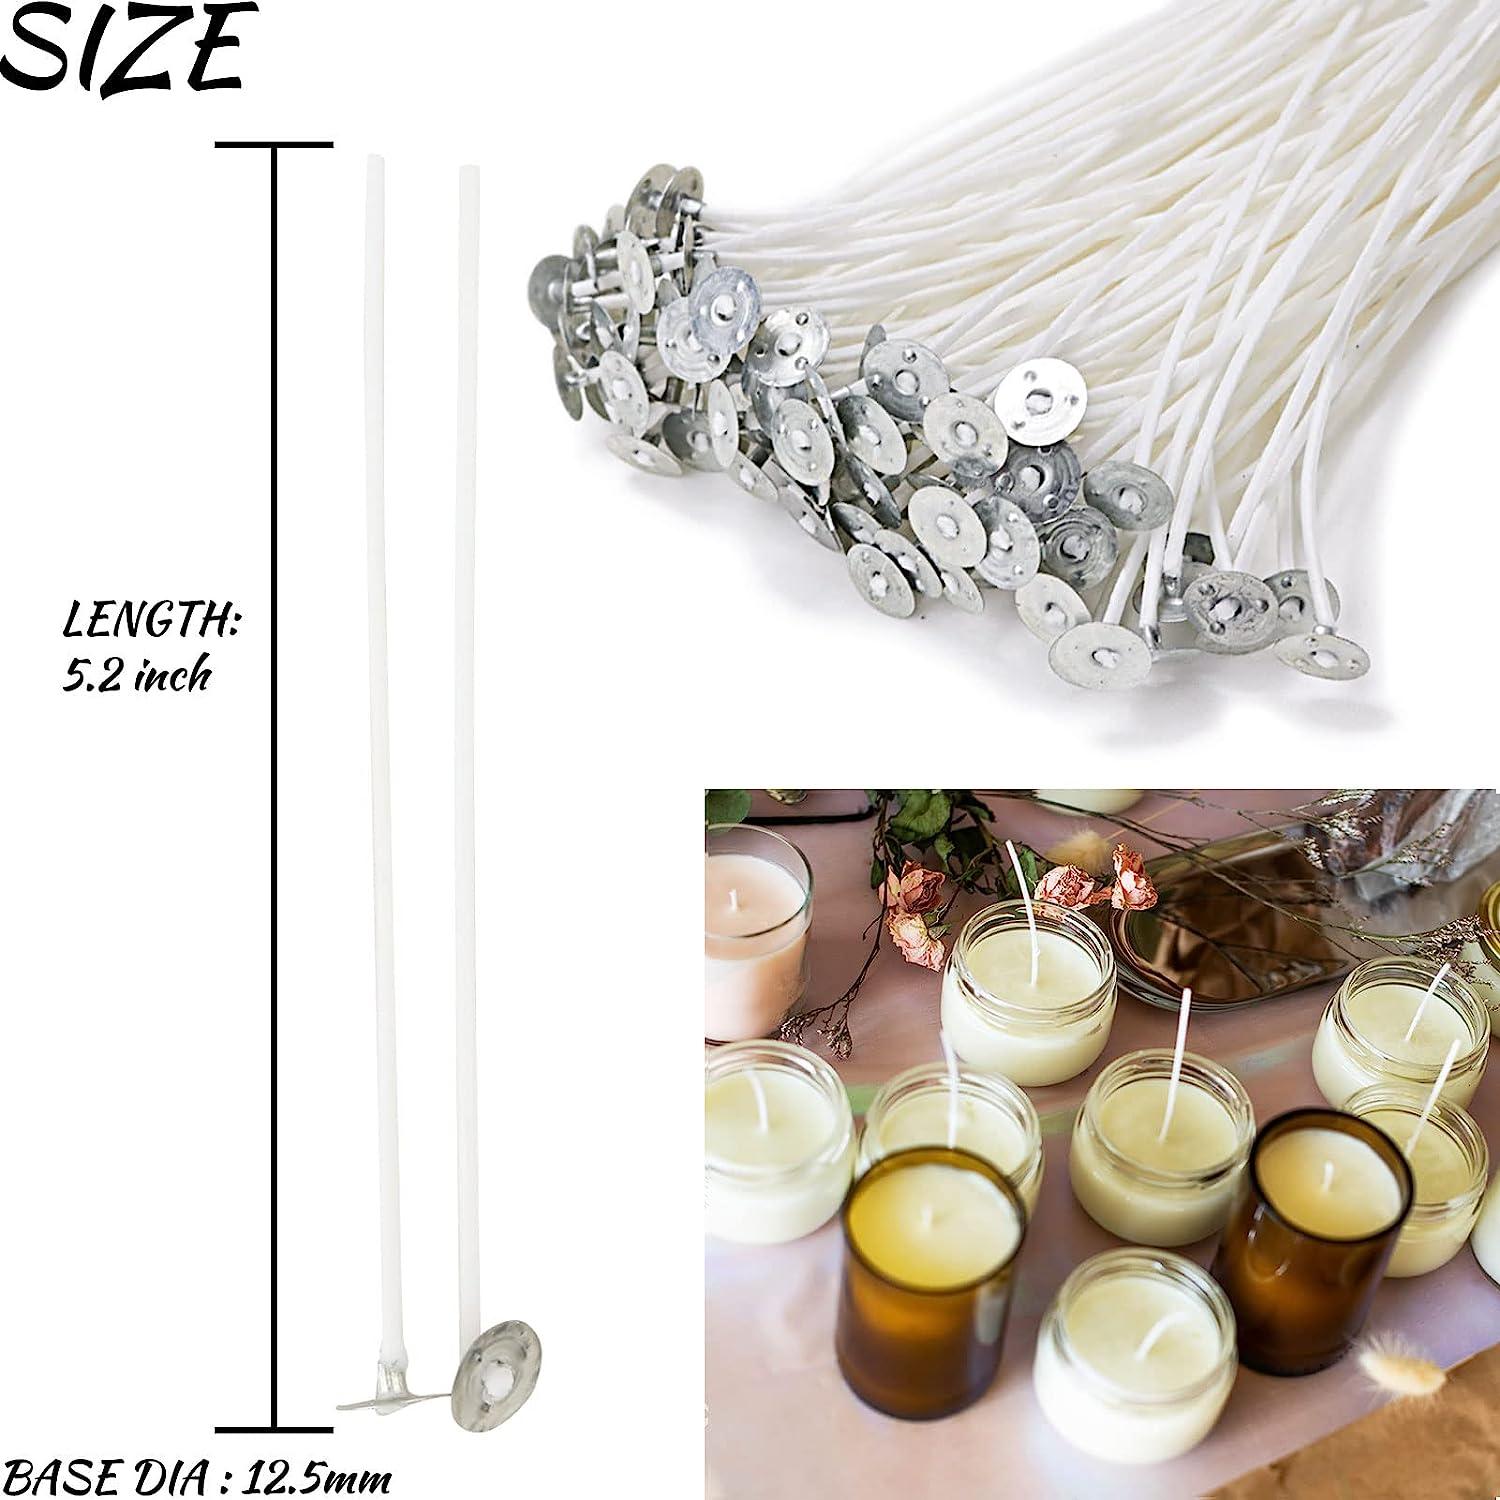 EricX Light Candle Making Kit, 60pcs Candle Wicks, 60pcs Candle Wicks  Sticker, 16oz Soy Wax, 1pc Candle Wax Pouring Pot, 2pcs 3-Hole Wicks  Centering Devices, 1pc Mixing Spoon, DIY Candles Craft Tools